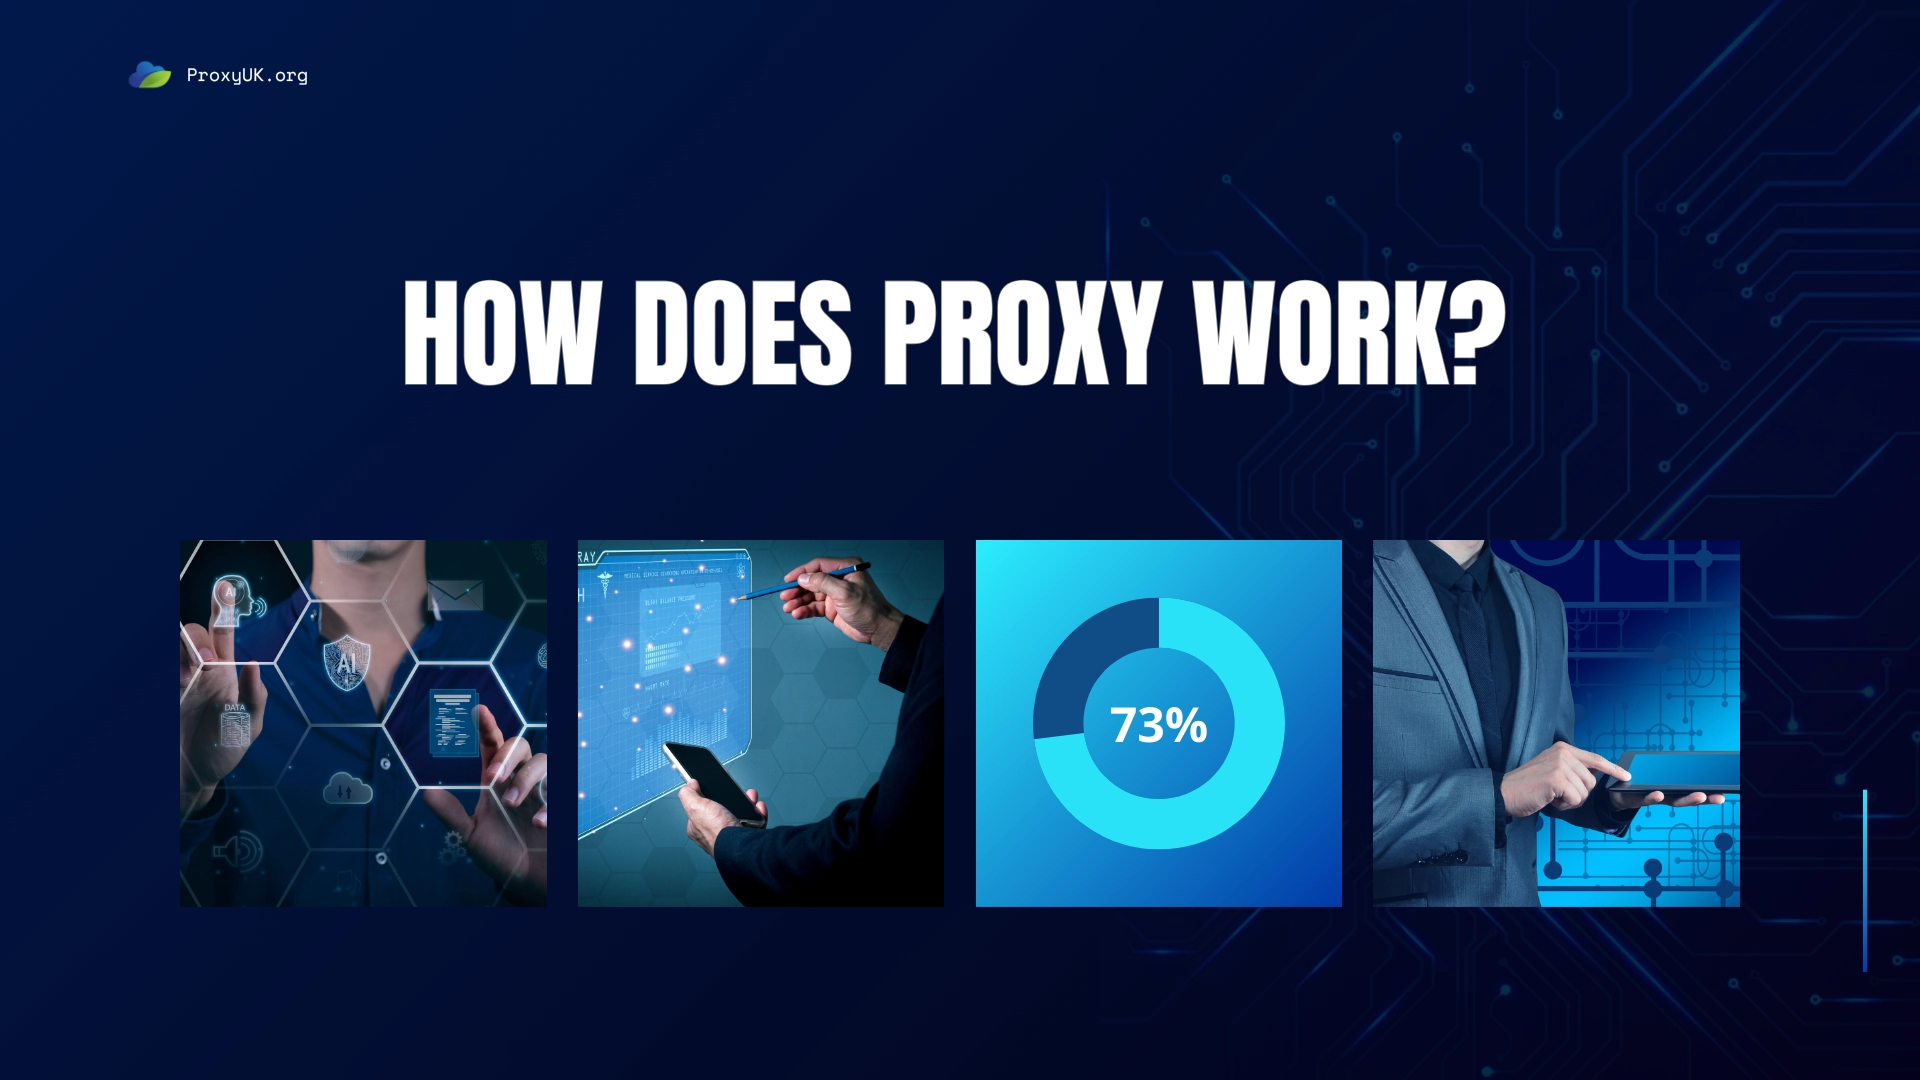 How does Proxy work?